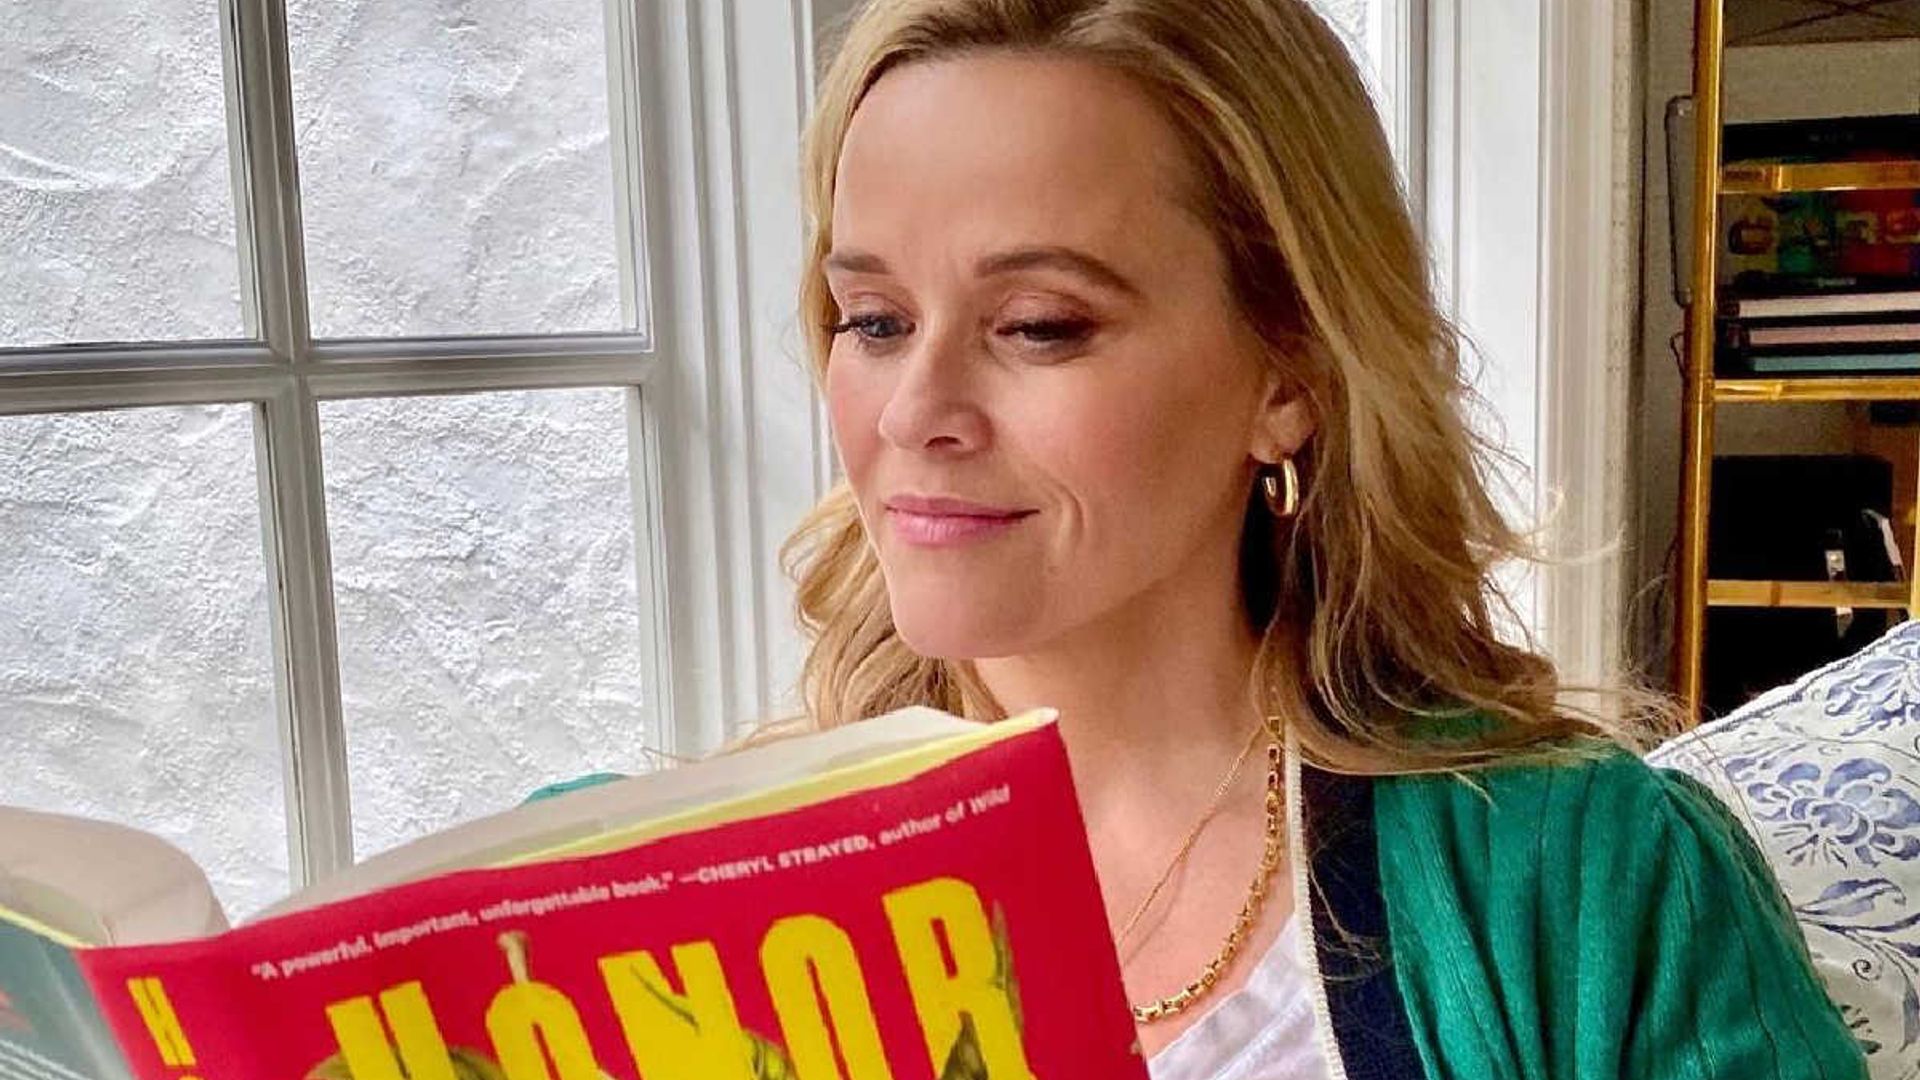 15 Reese Witherspoon Book Club picks from Daisy Jones & the Six to her latest must-read